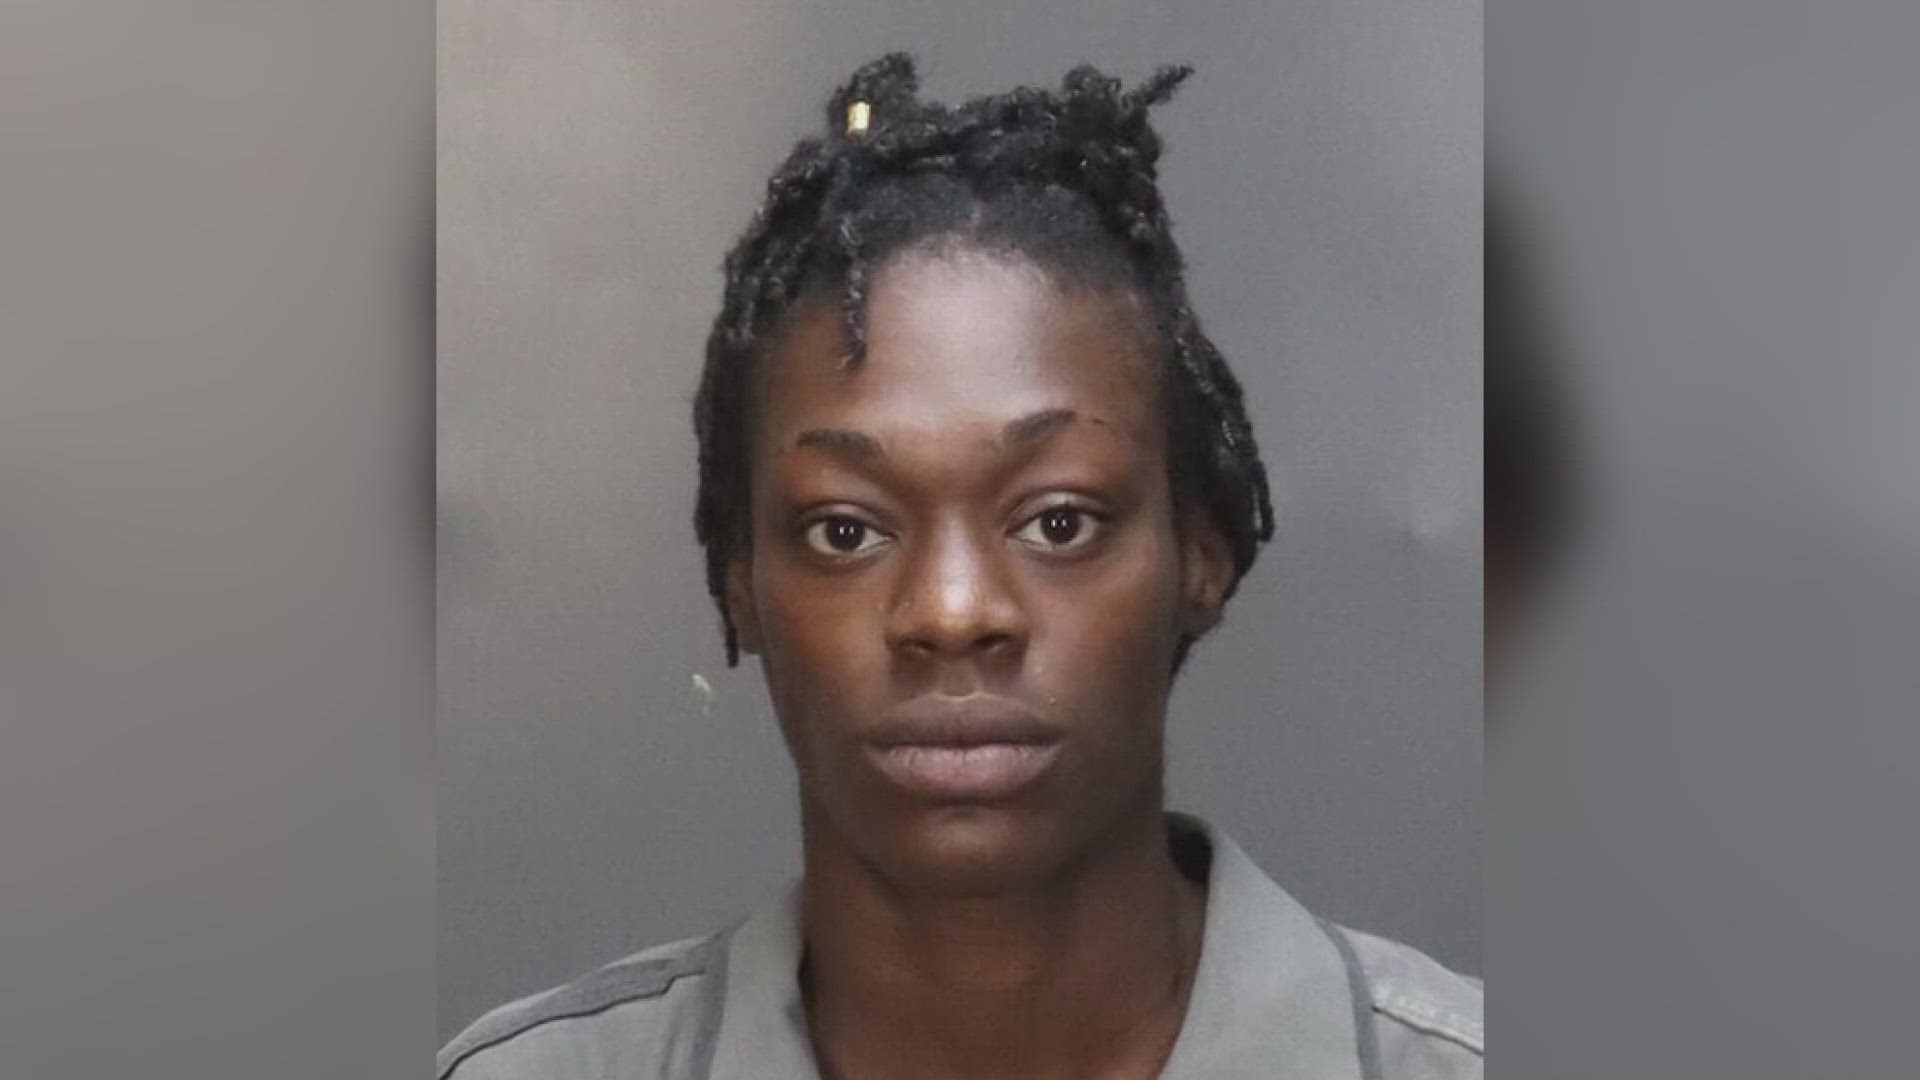 The Lacy Lakeview Police Department issued three manslaughter warrants for Acacia Adams on July 20.